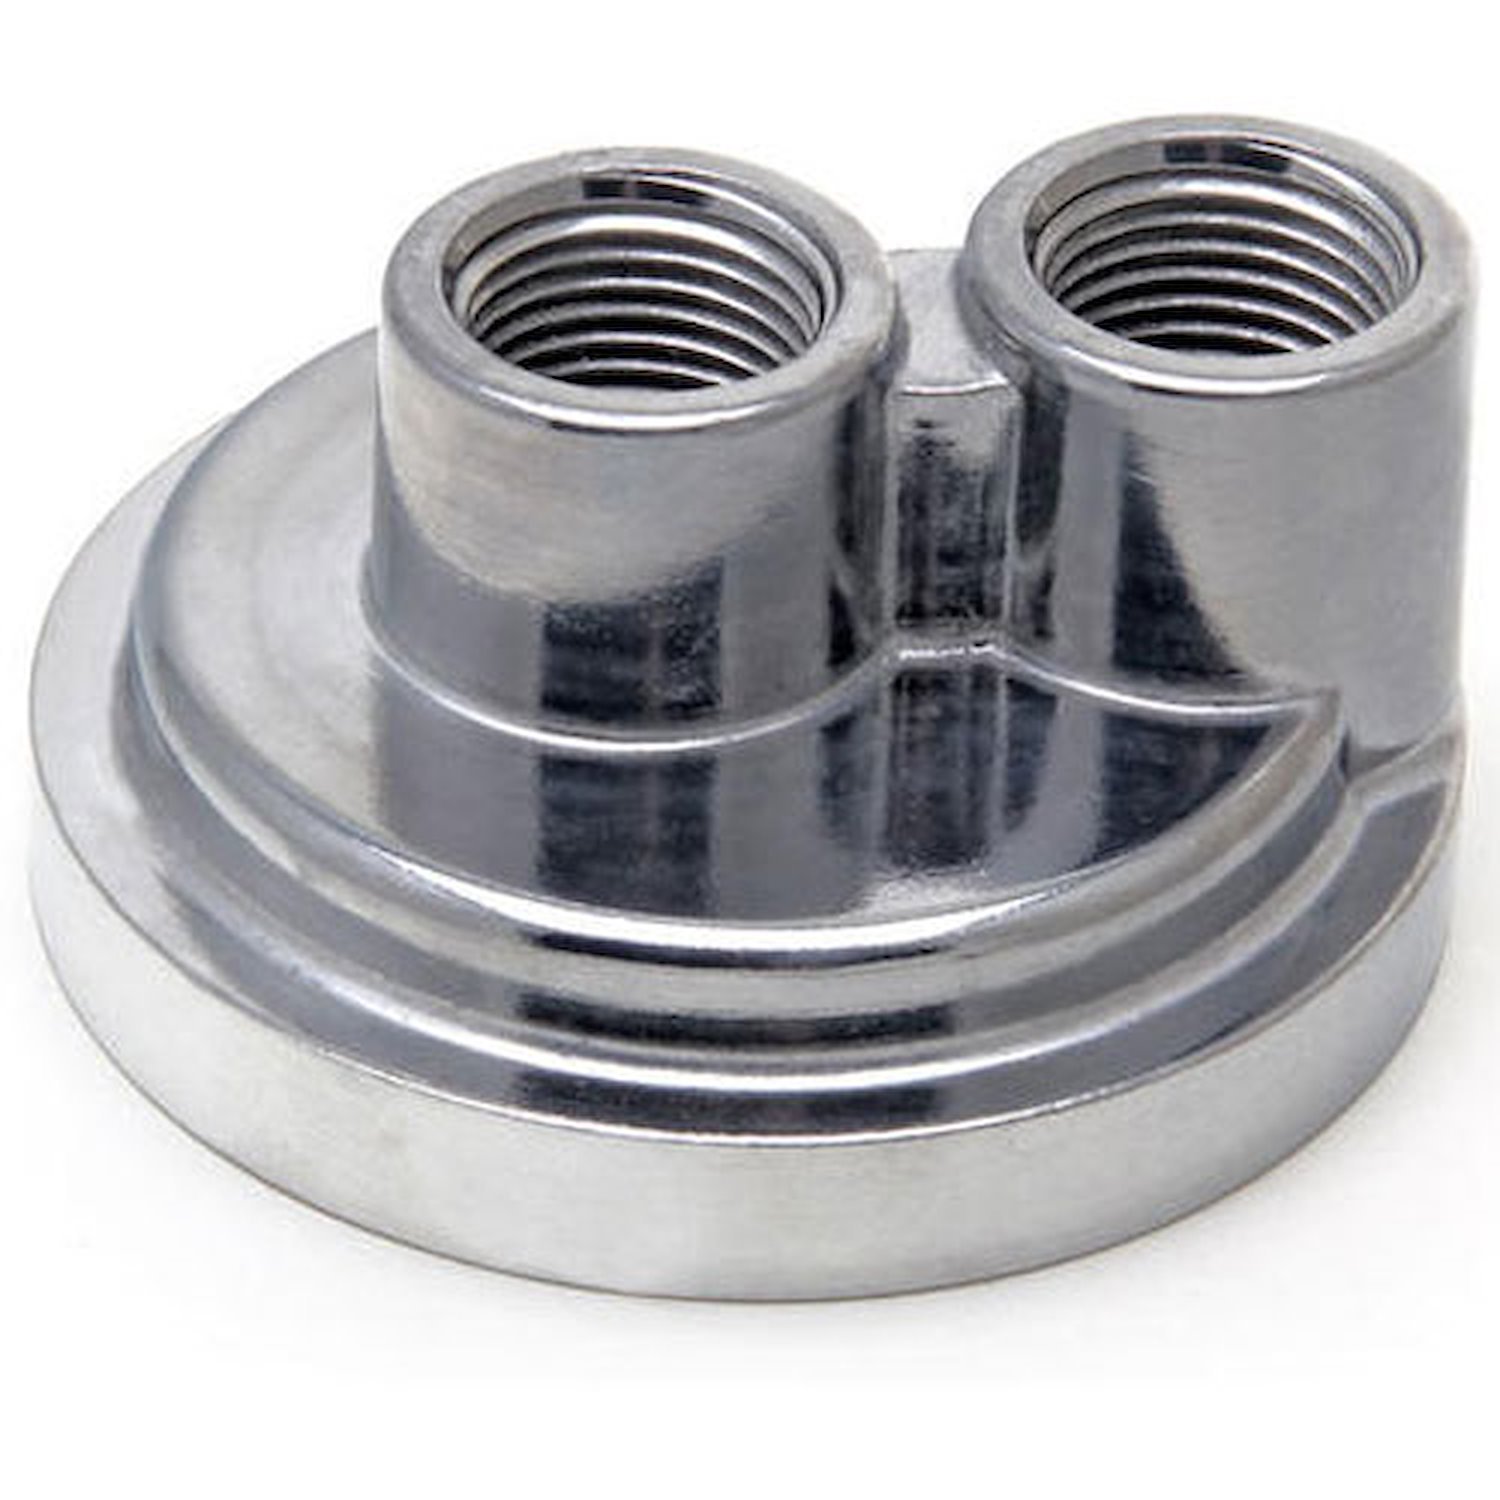 Spin-On Oil Filter Bypass Adapter Small Block Chevy V8